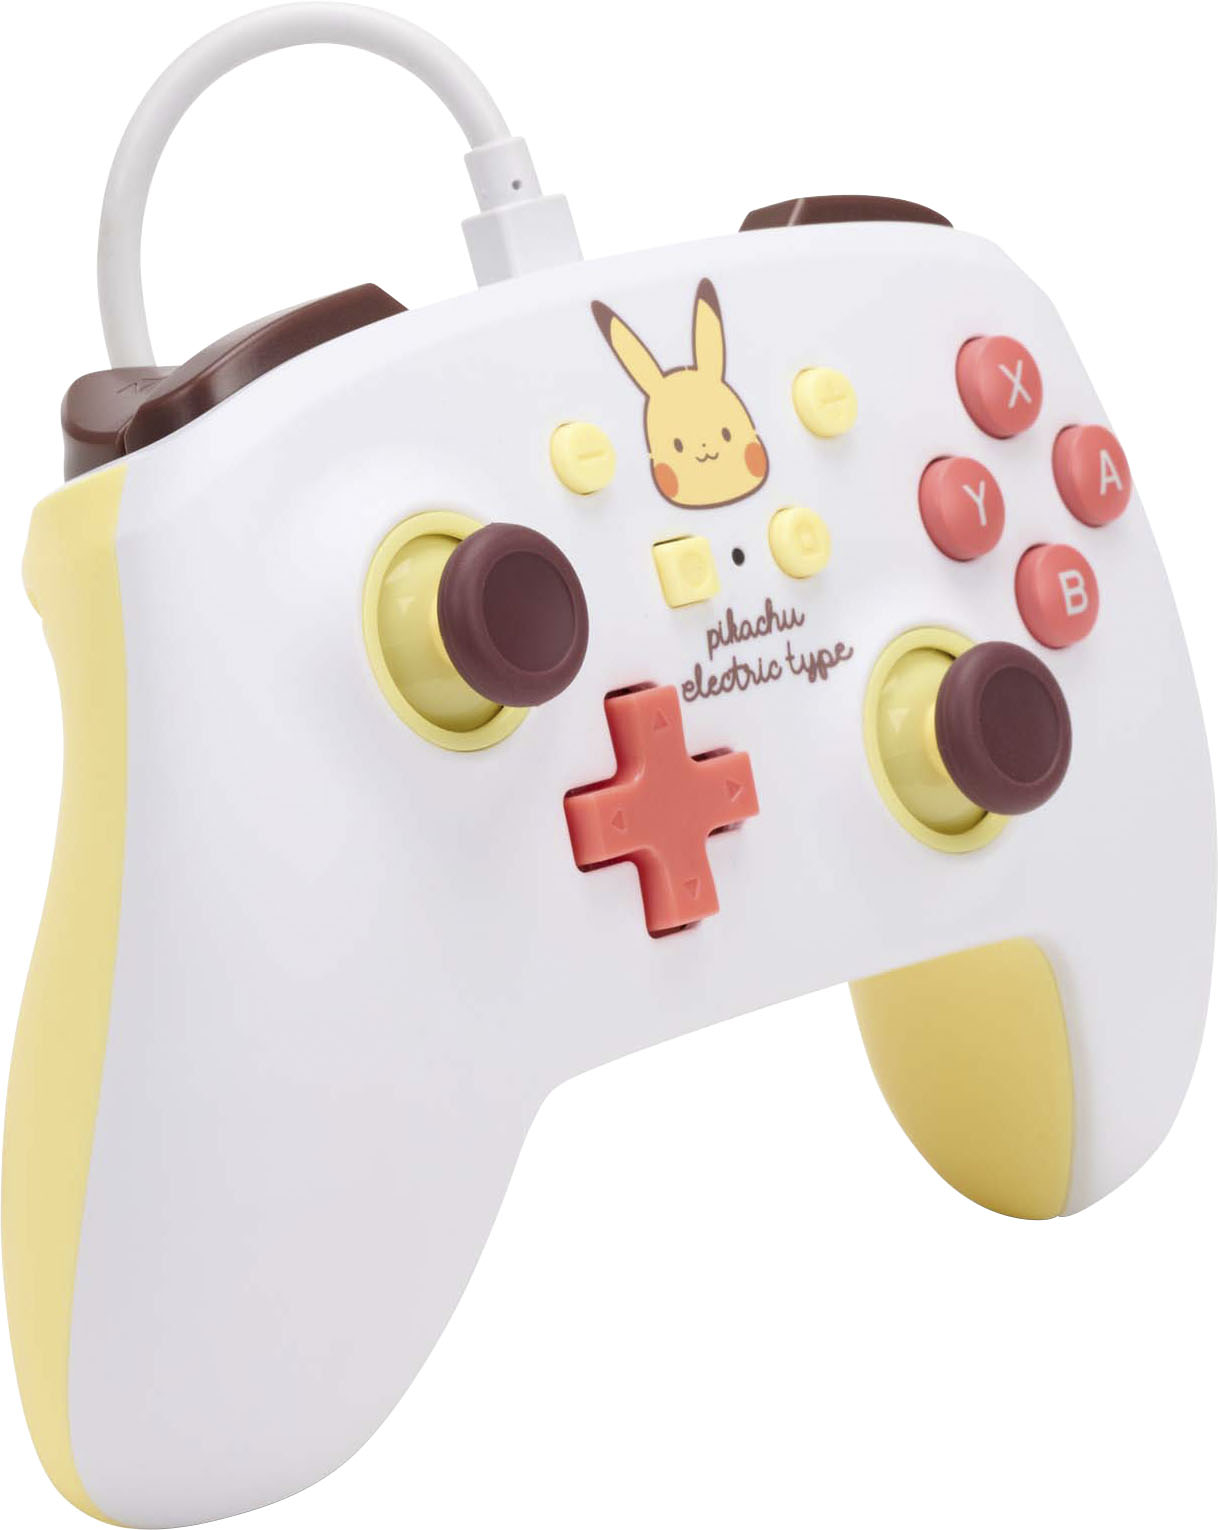 Angle View: PowerA Enhanced Wired Controller for Nintendo Switch - Pikachu Electric Type